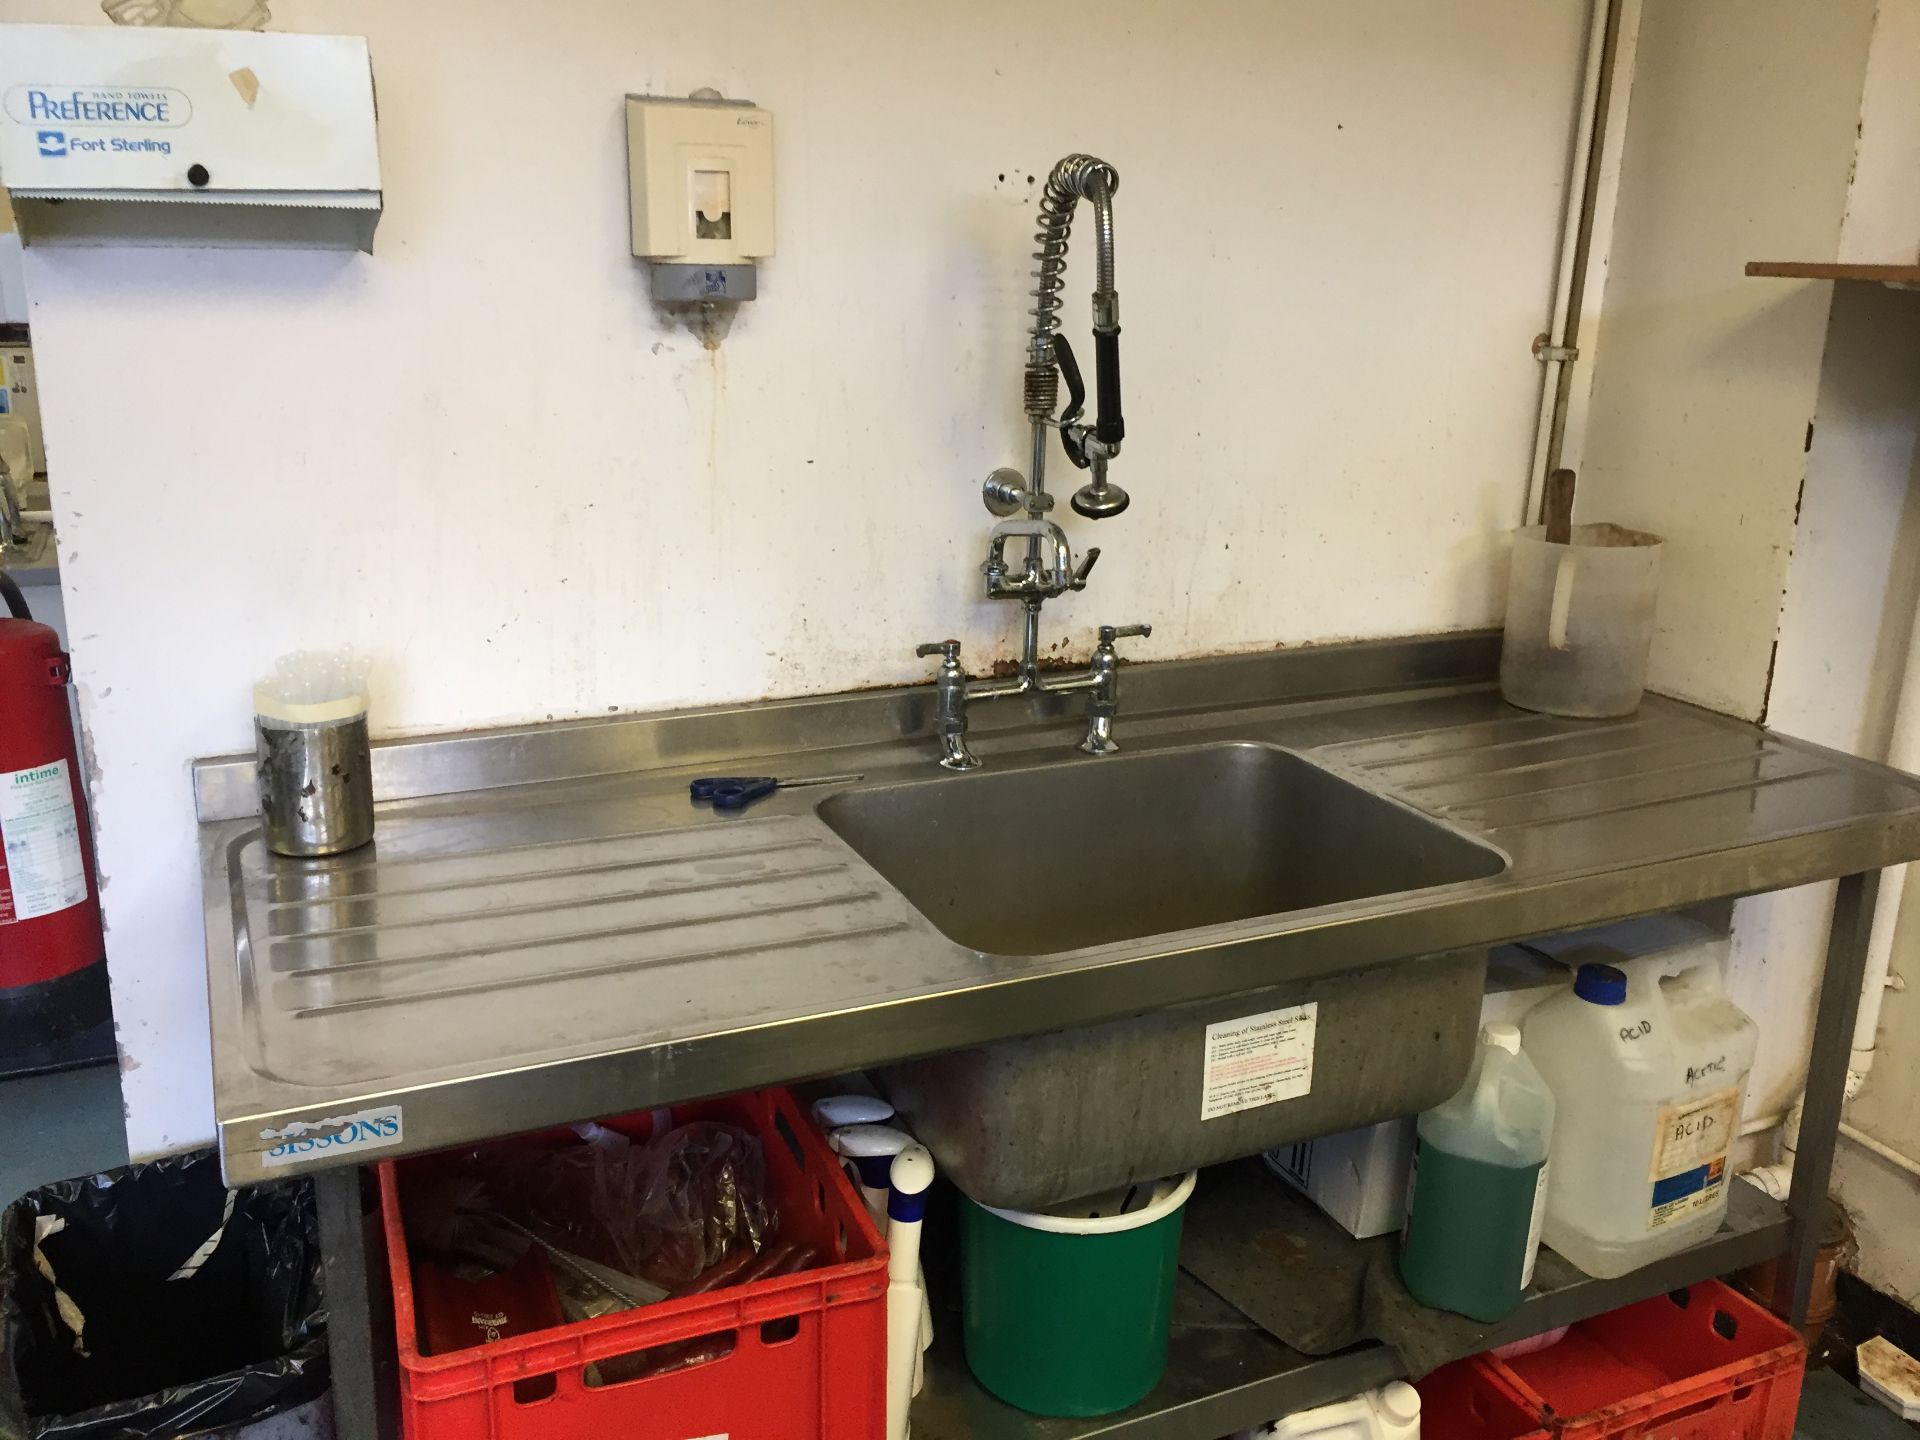 Laboratory Stainless Steel Double Drainer Sink on